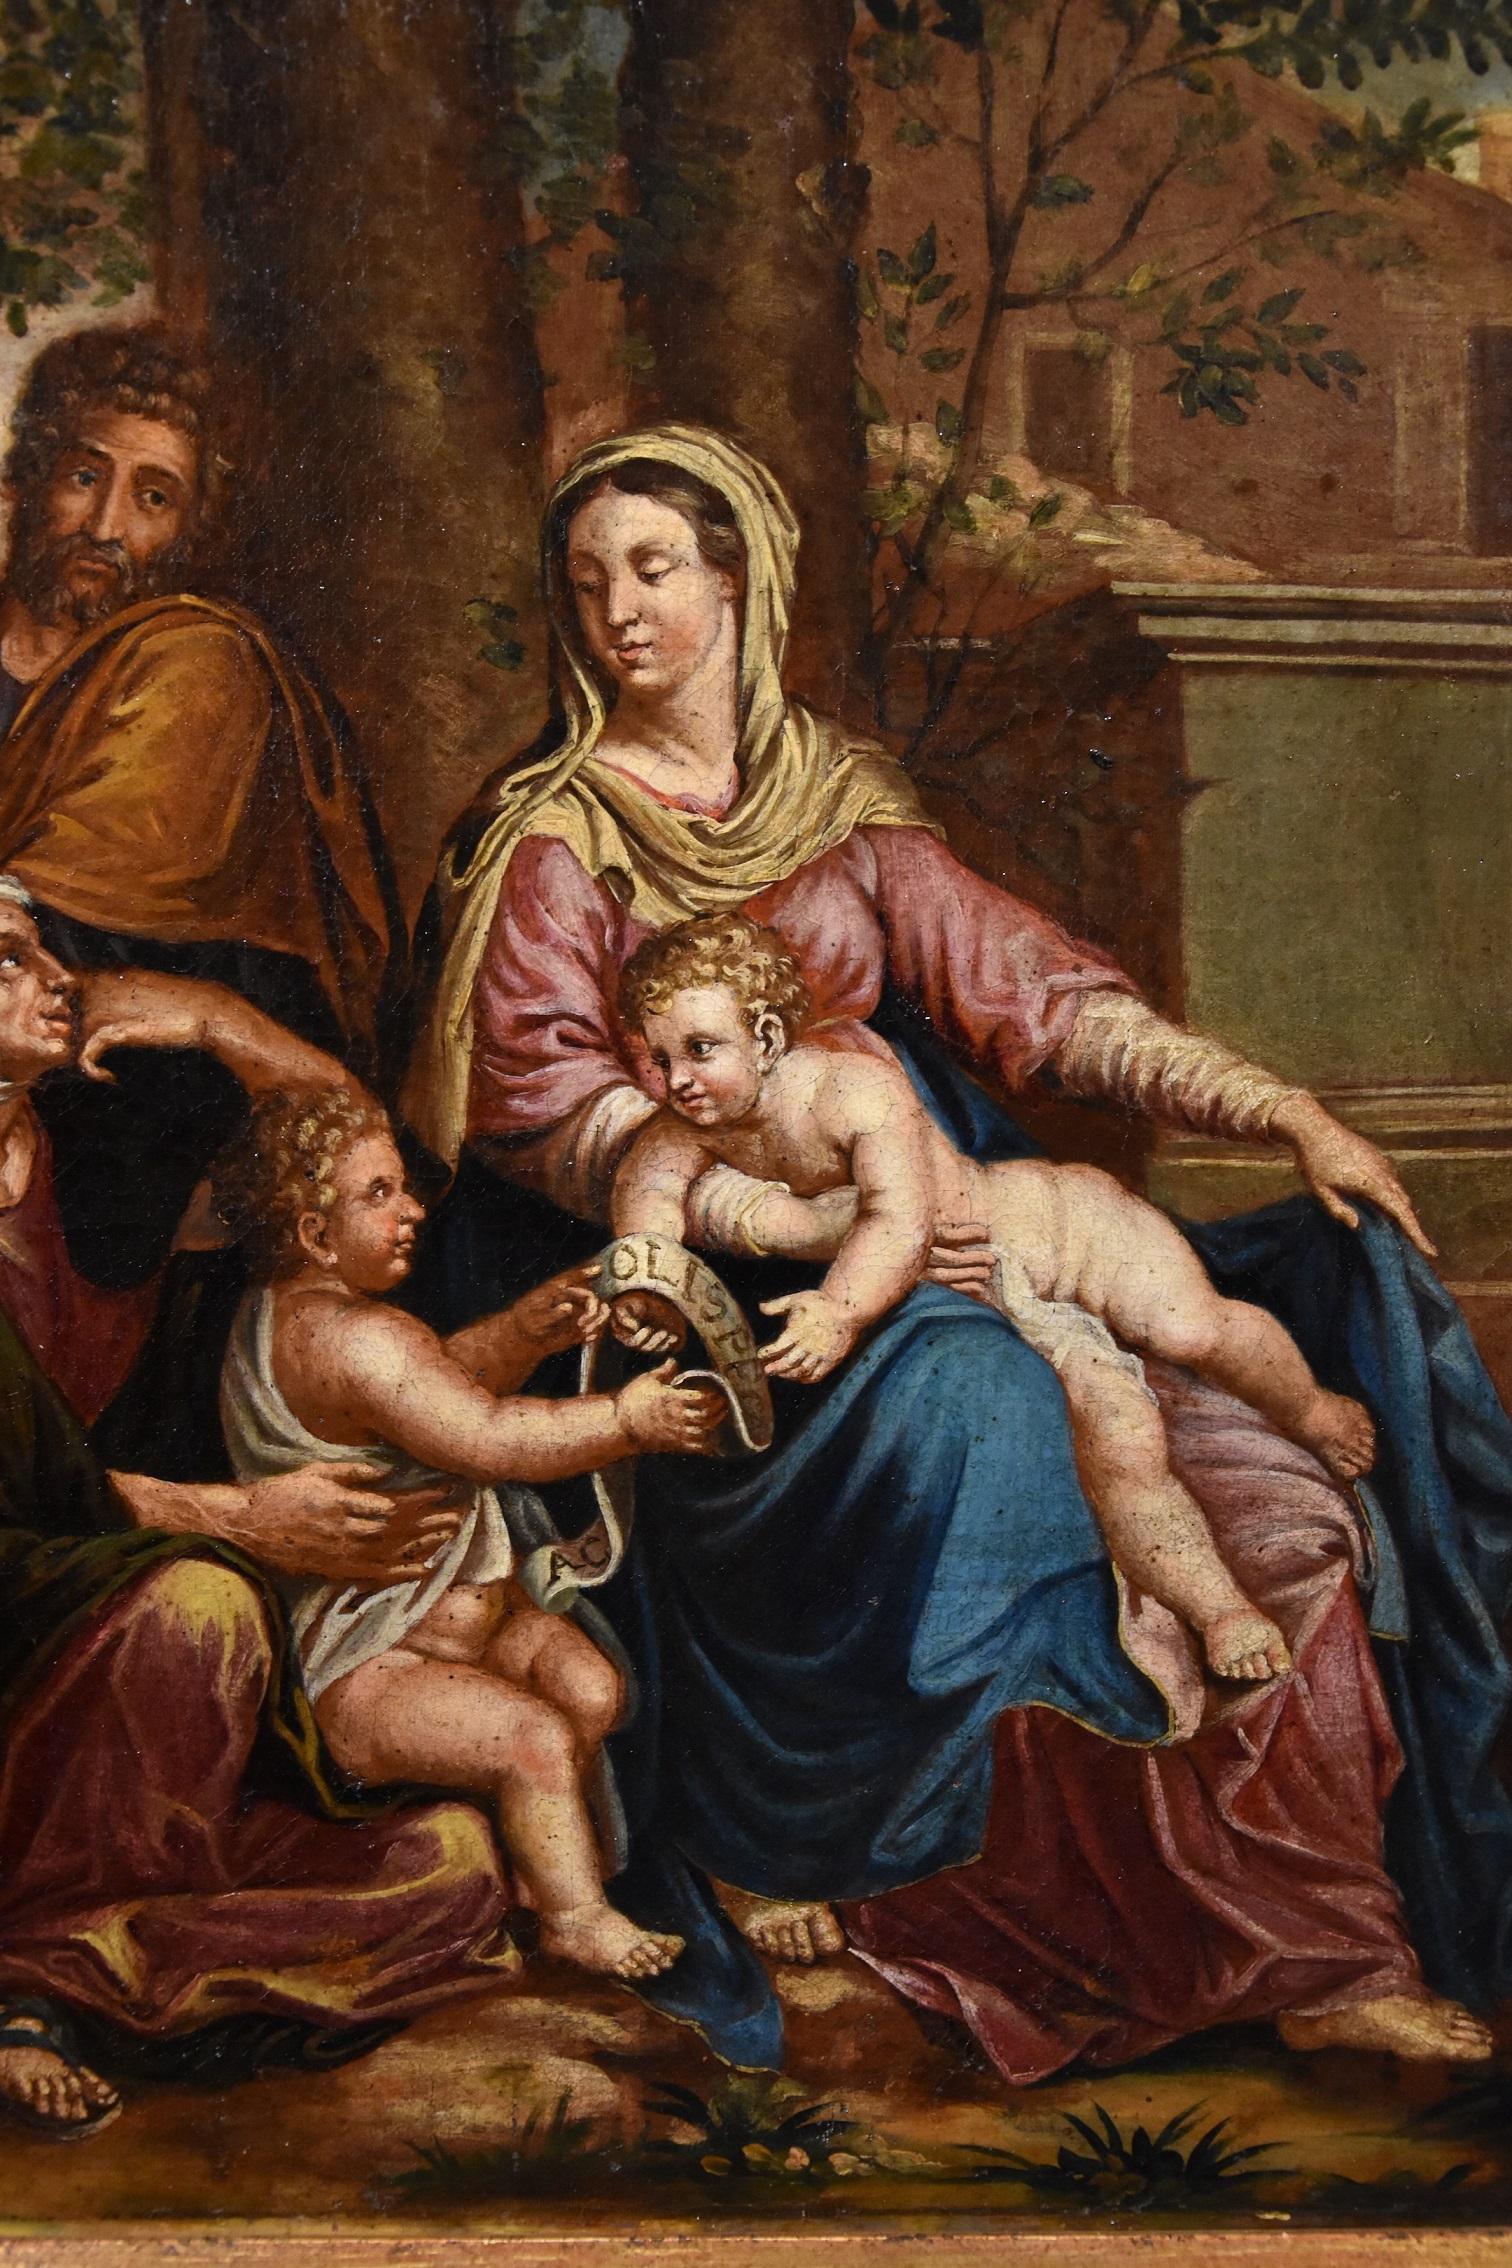 Holy Family Poussin Paint Oil on canvas Old master 17th Century Religious Art 2